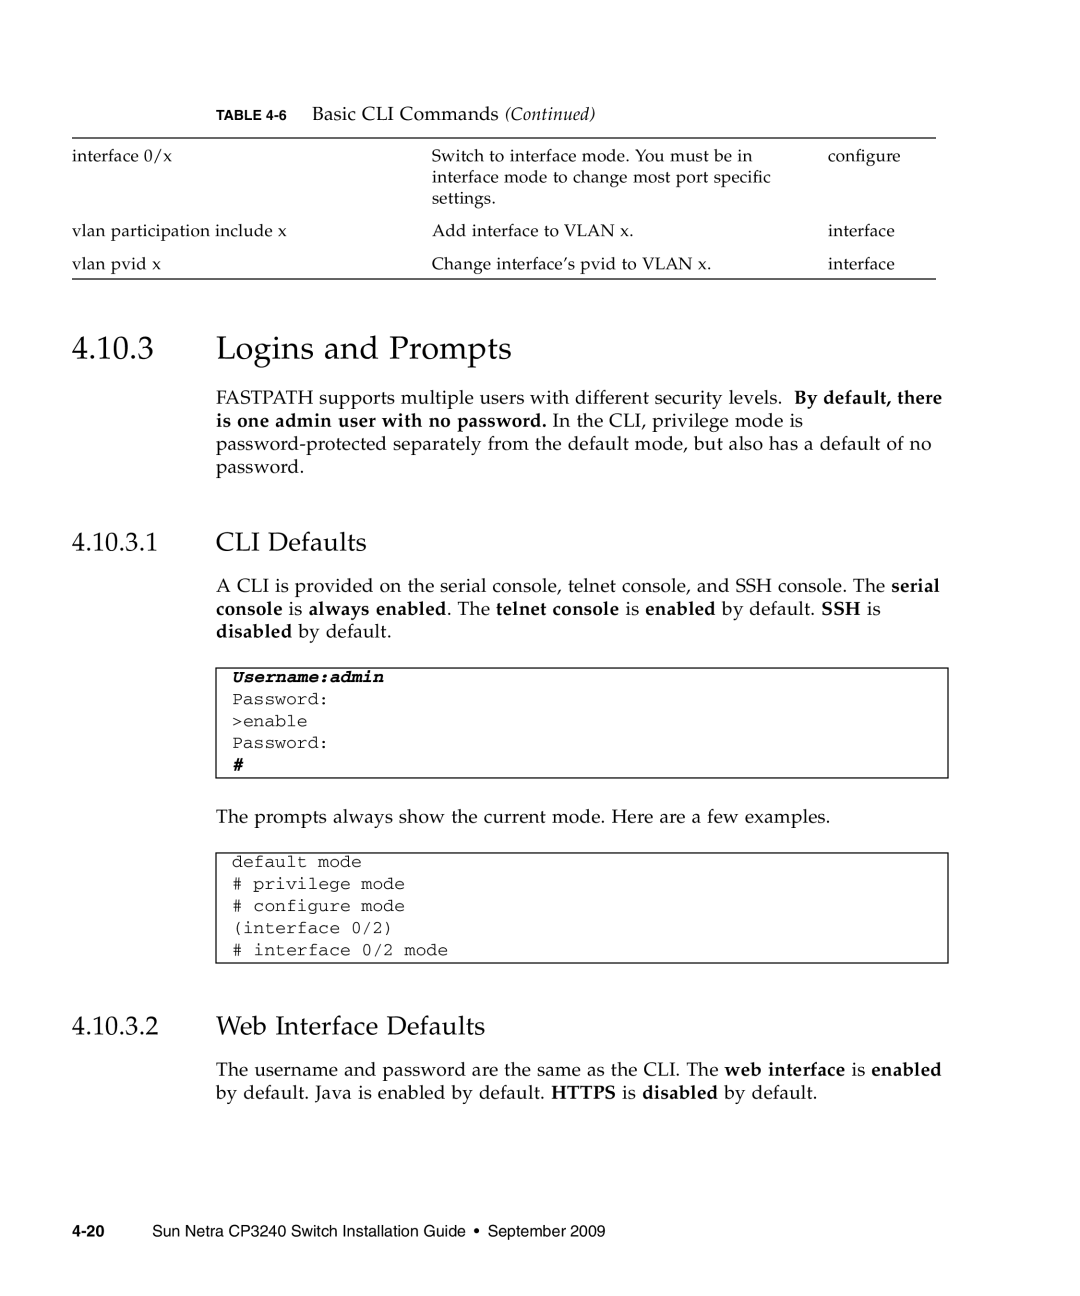 Sun Microsystems CP3240 manual Logins and Prompts, CLI Defaults, Web Interface Defaults 